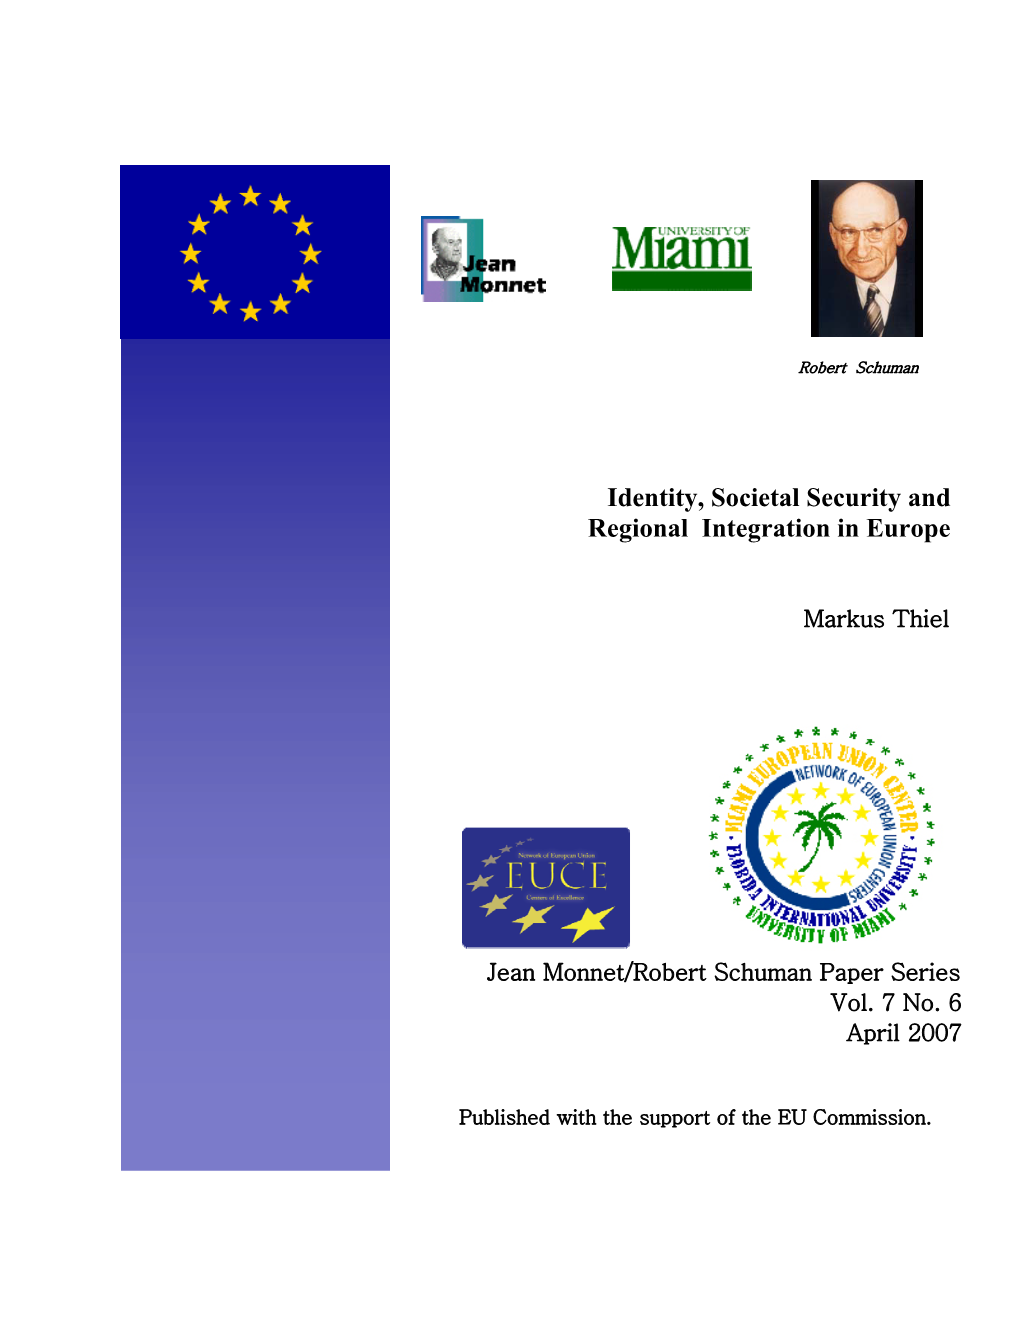 Identity, Societal Security and Regional Integration in Europe